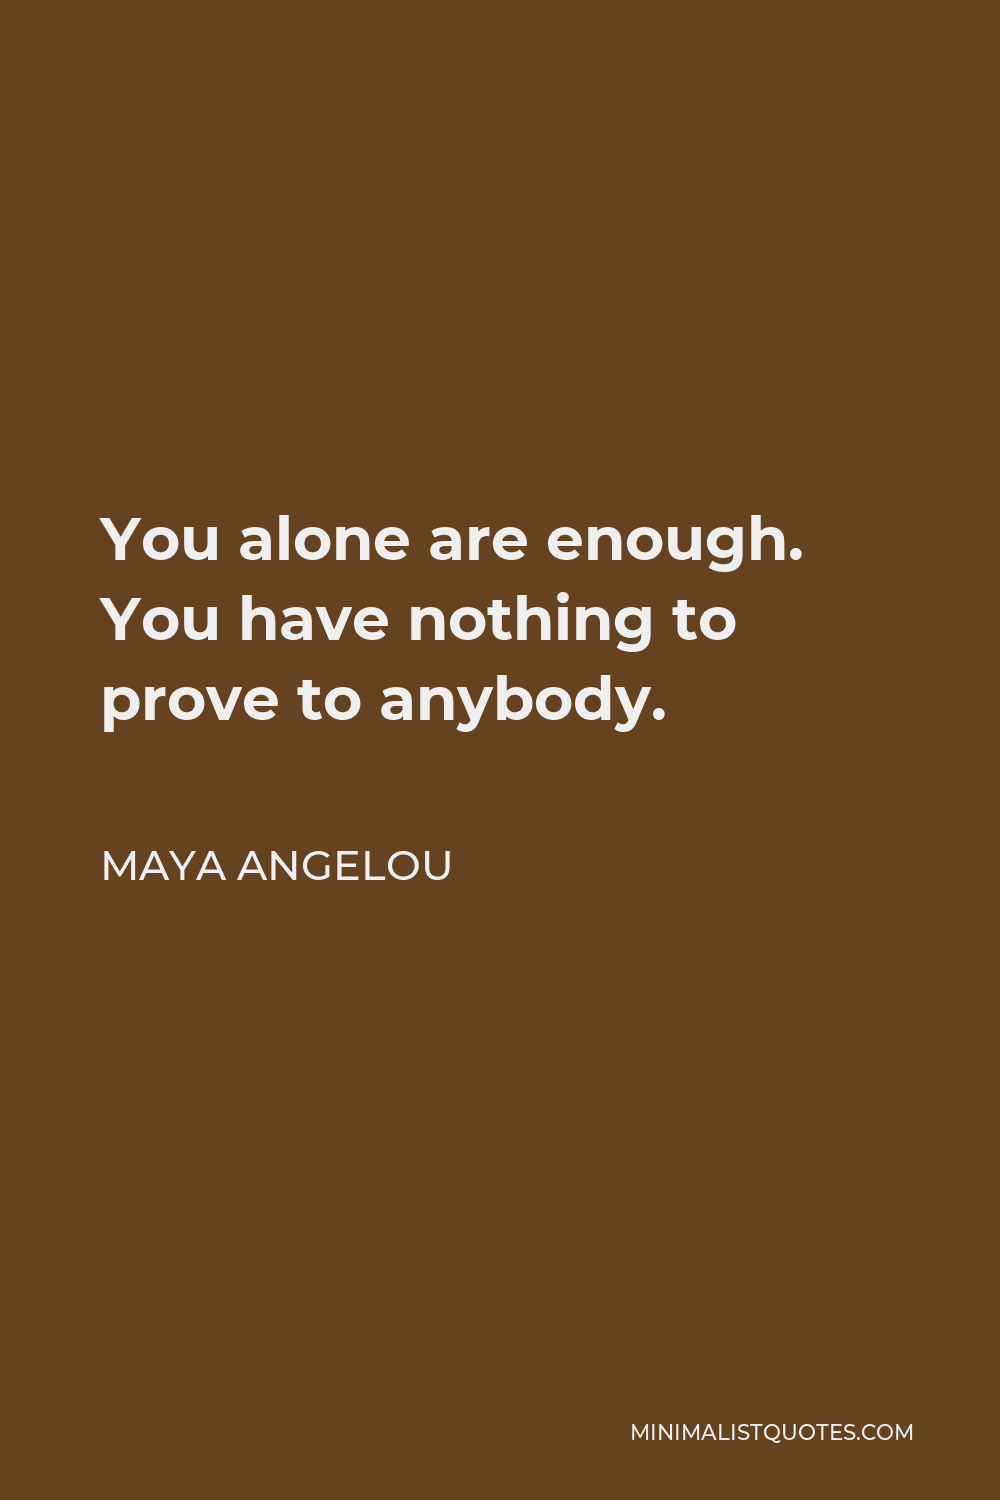 Maya Angelou Quote - You alone are enough. You have nothing to prove to anybody.